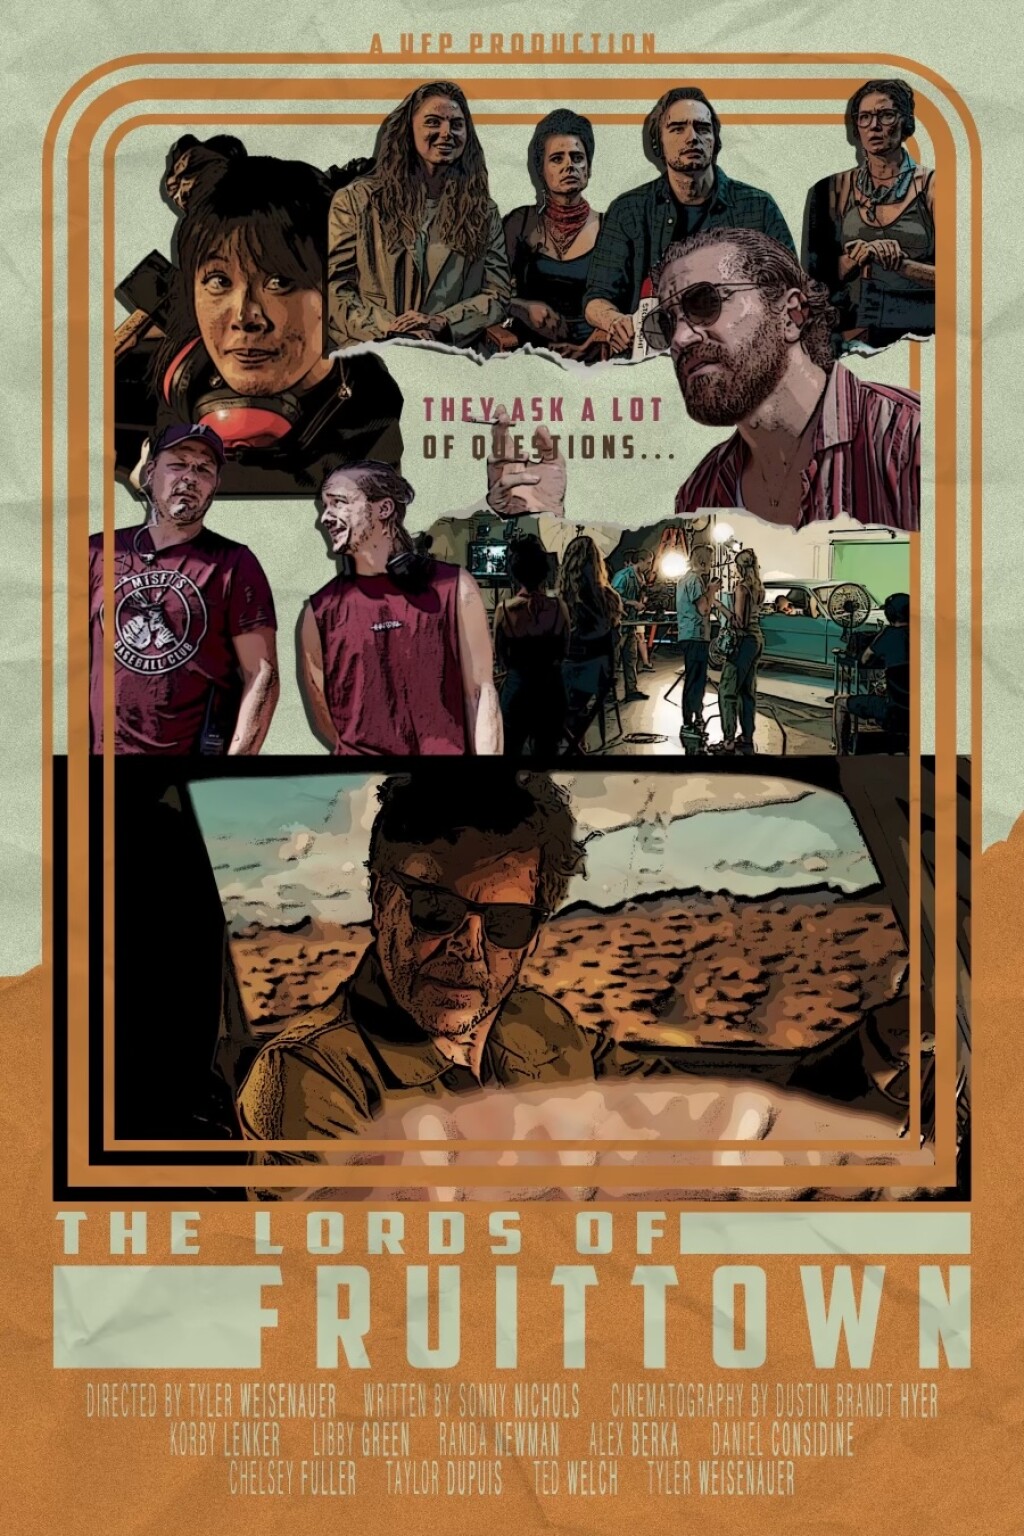 Filmposter for Lords of Fruit Town